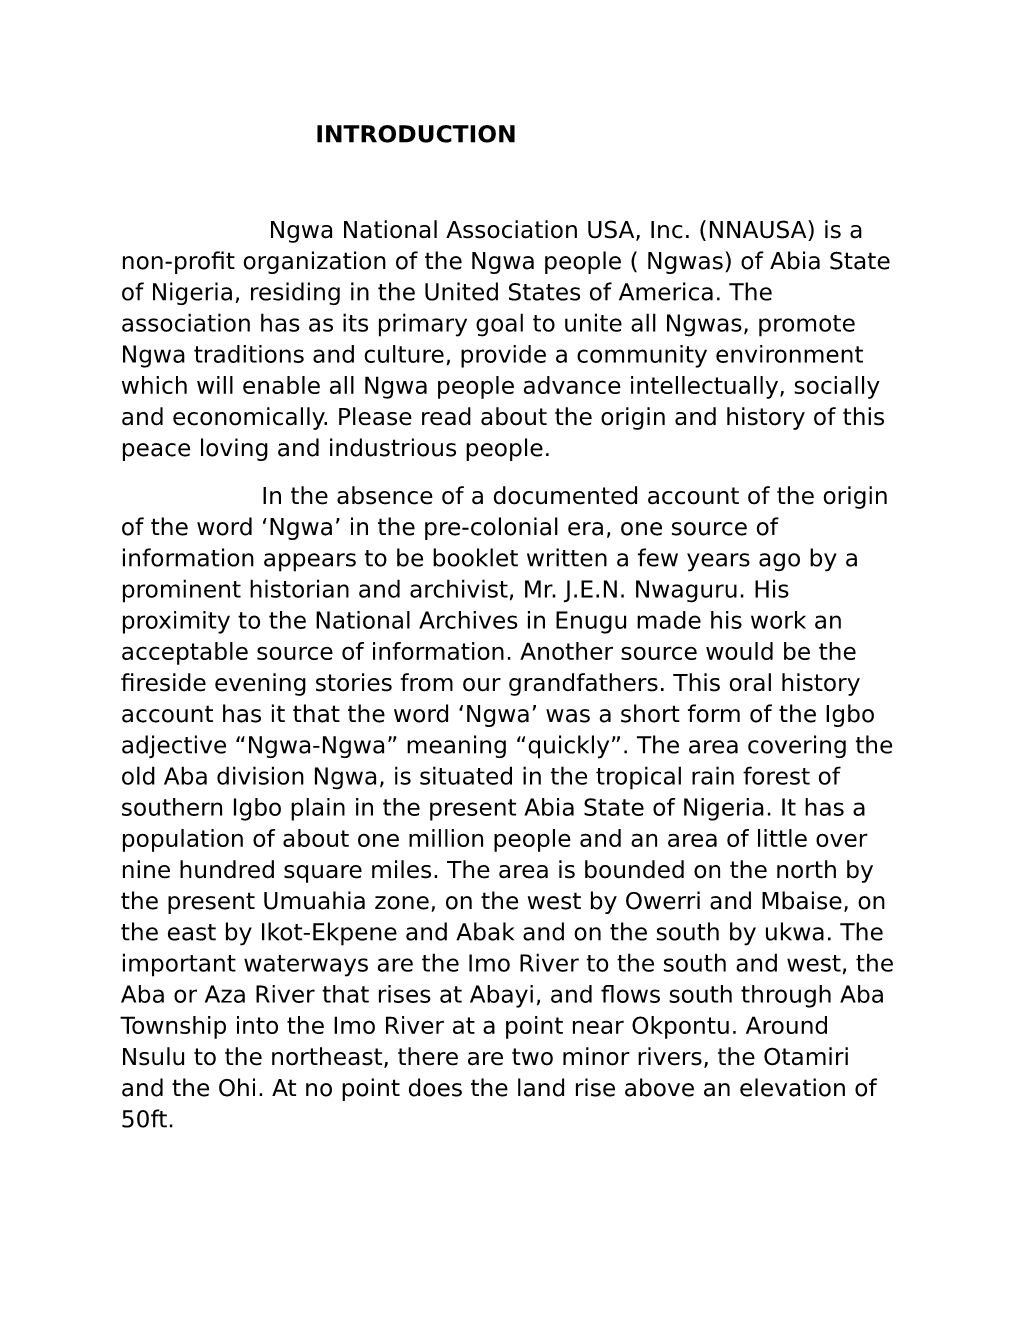 Is a Non-Profit Organization of the Ngwa People ( Ngwas) of Abia State of Nigeria, Residing in the United States of America